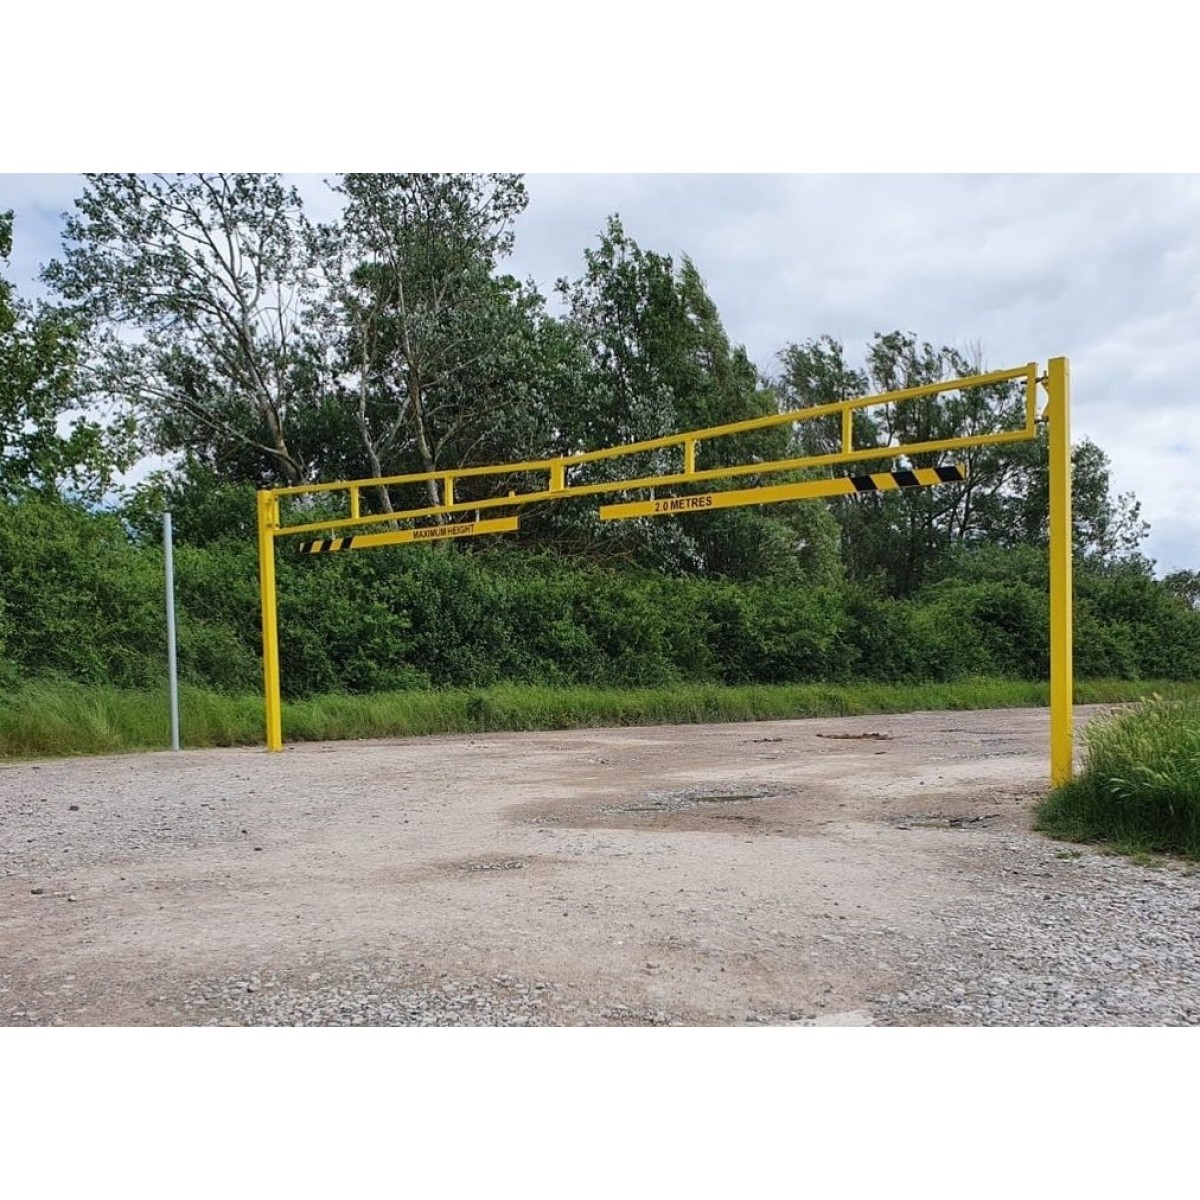 SB.23H 8 Metre Double Leaf Height Barrier 